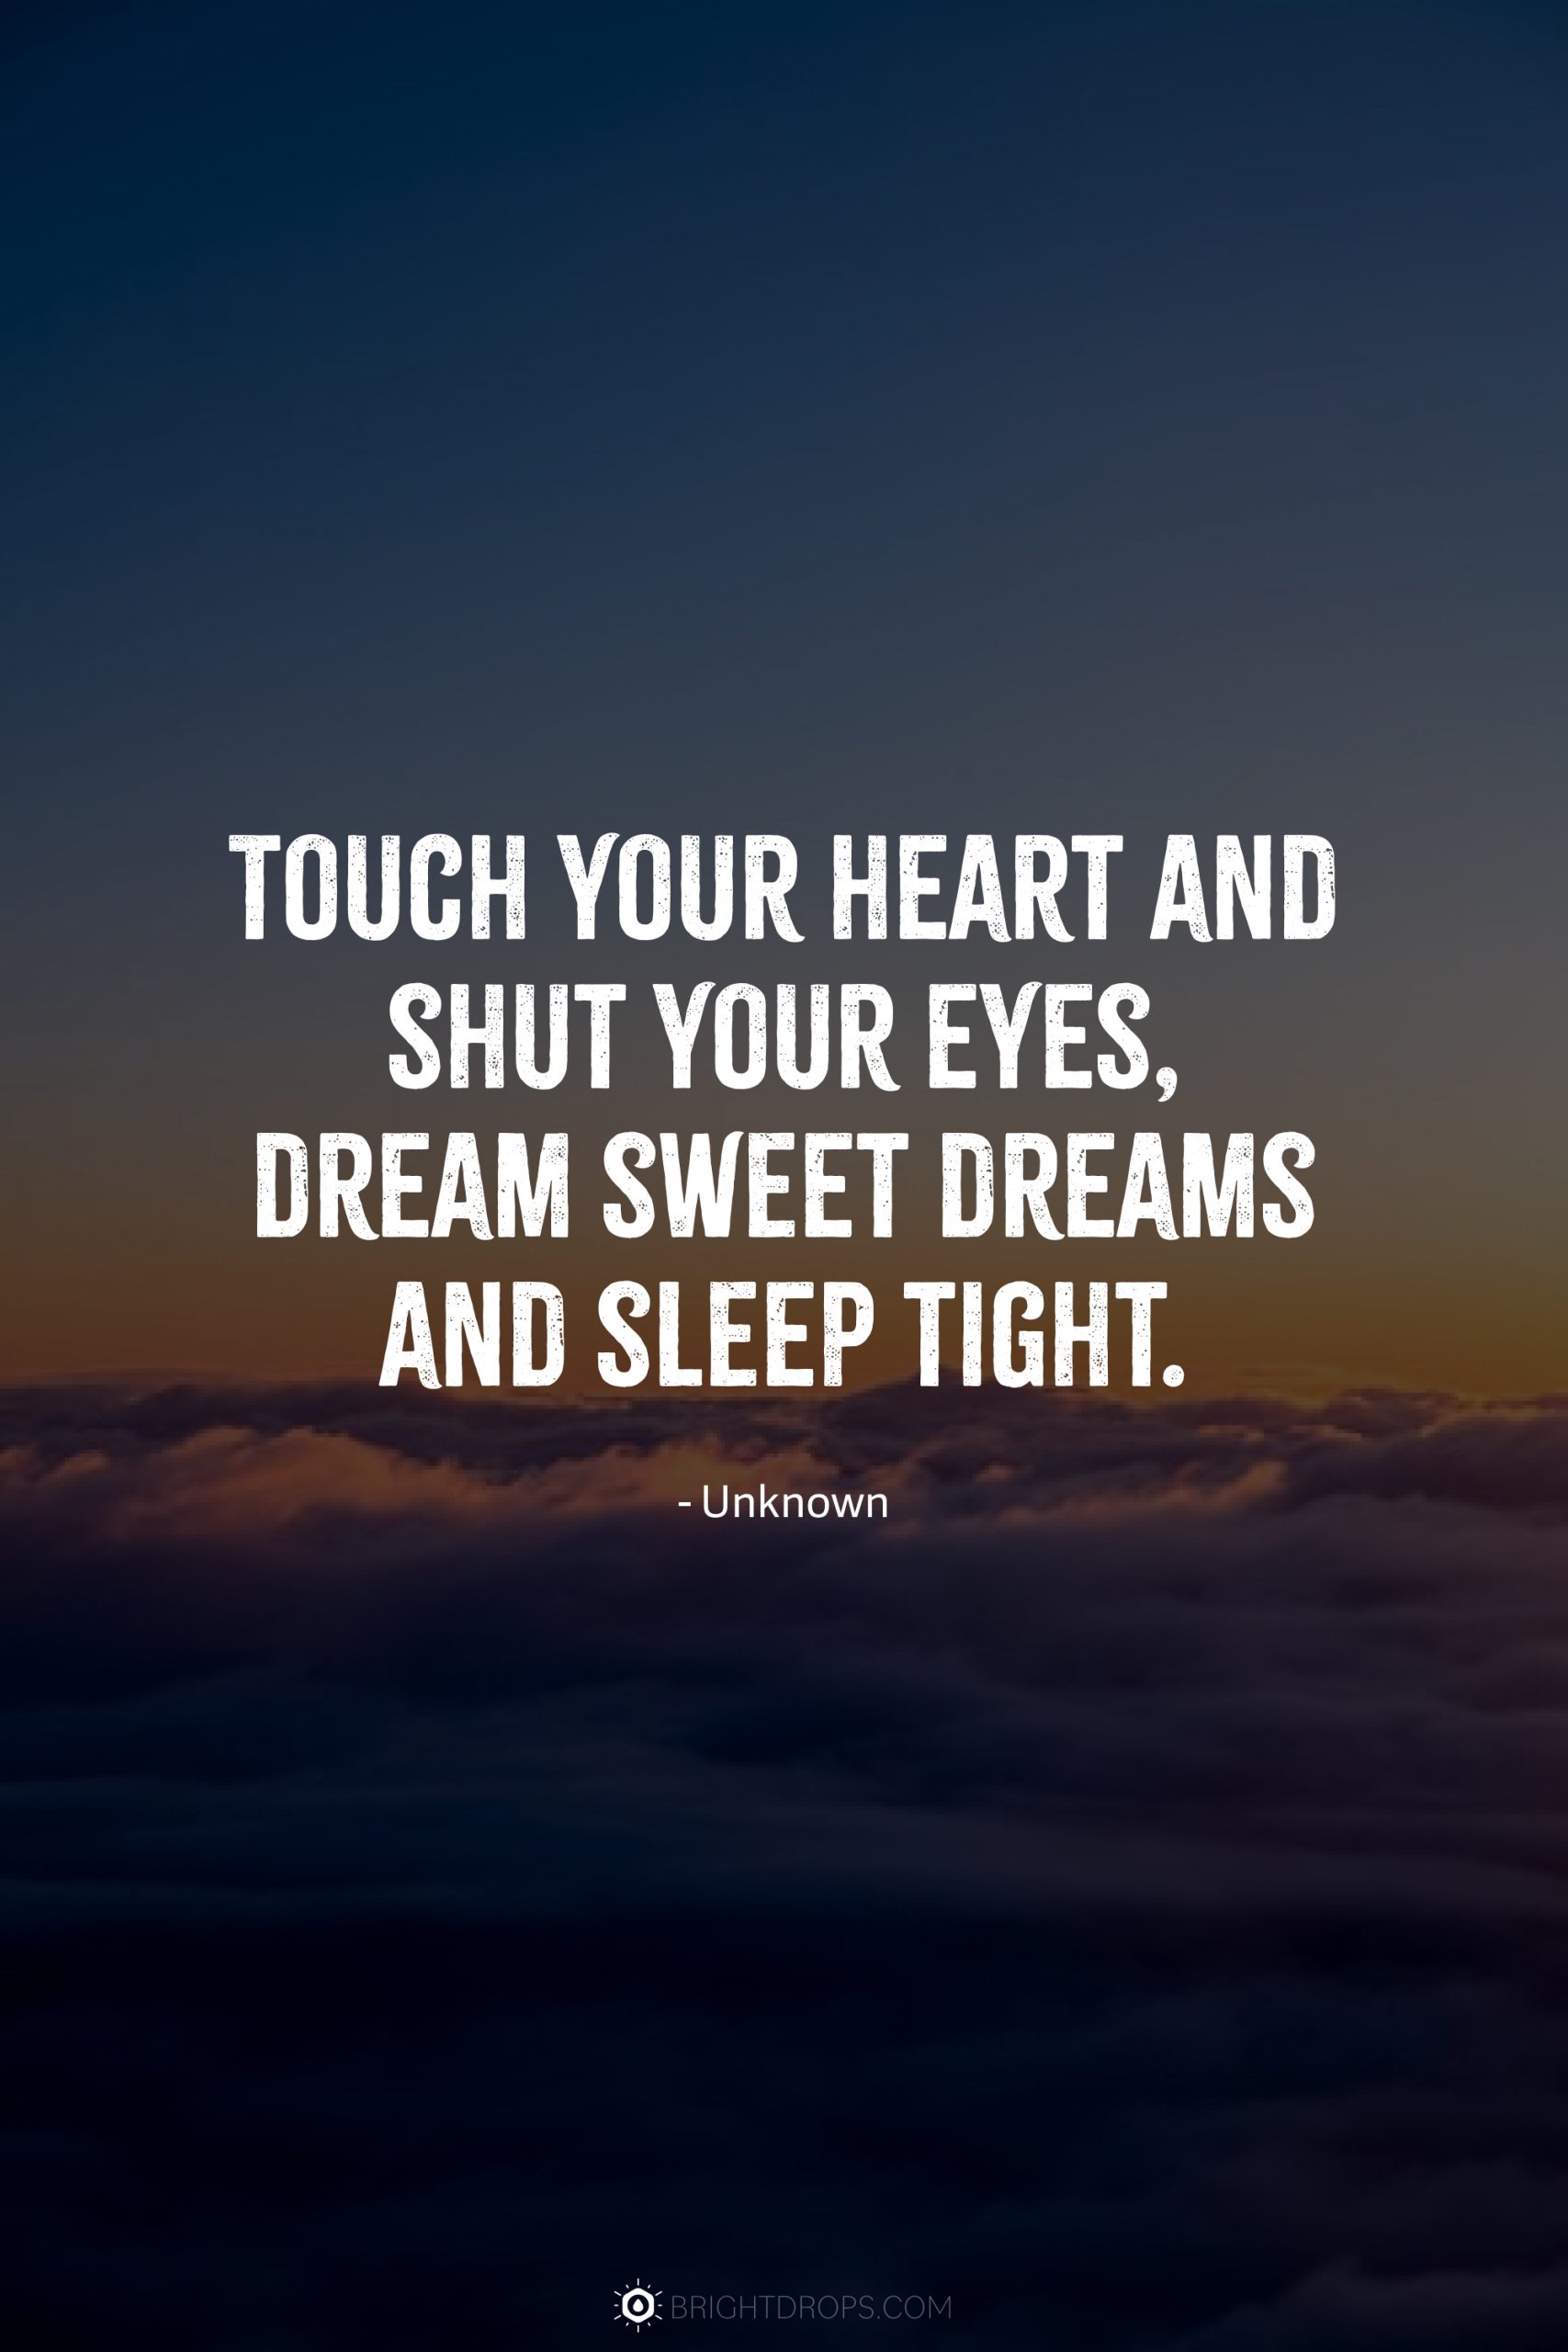 Touch your heart and shut your eyes, dream sweet dreams and sleep tight.